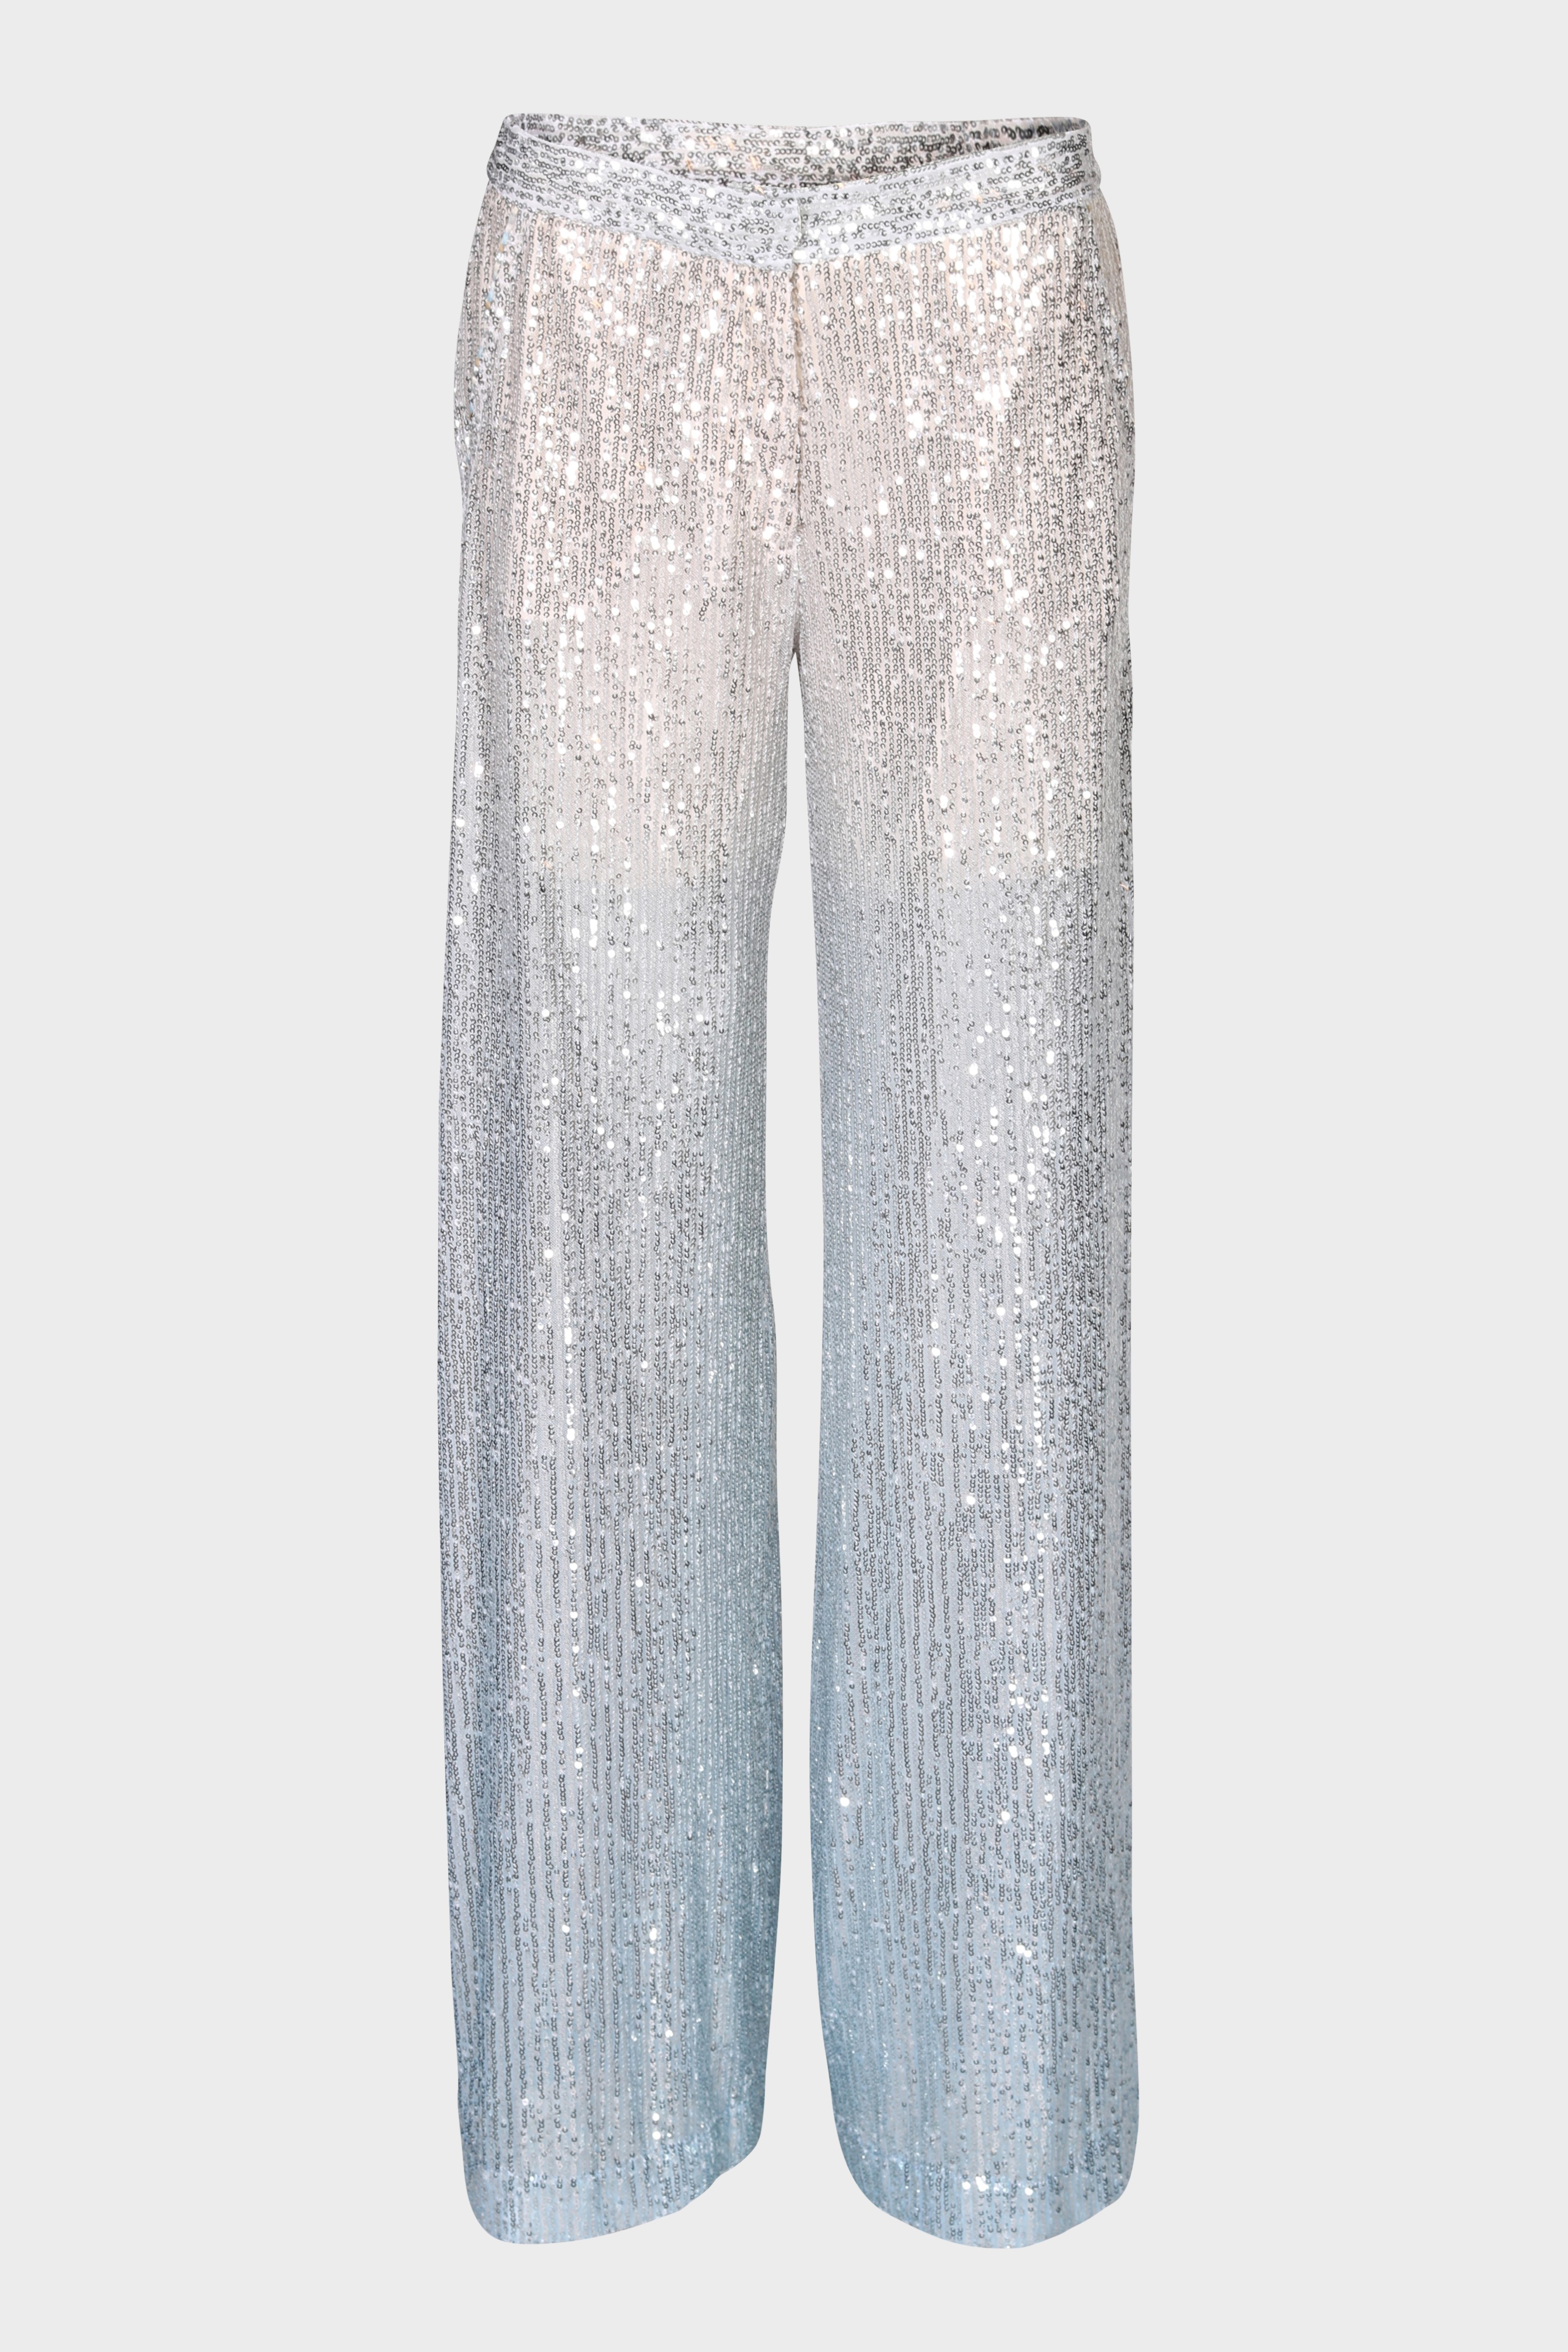 BAZAR DELUXE Sequins Pant in Creme/Blue